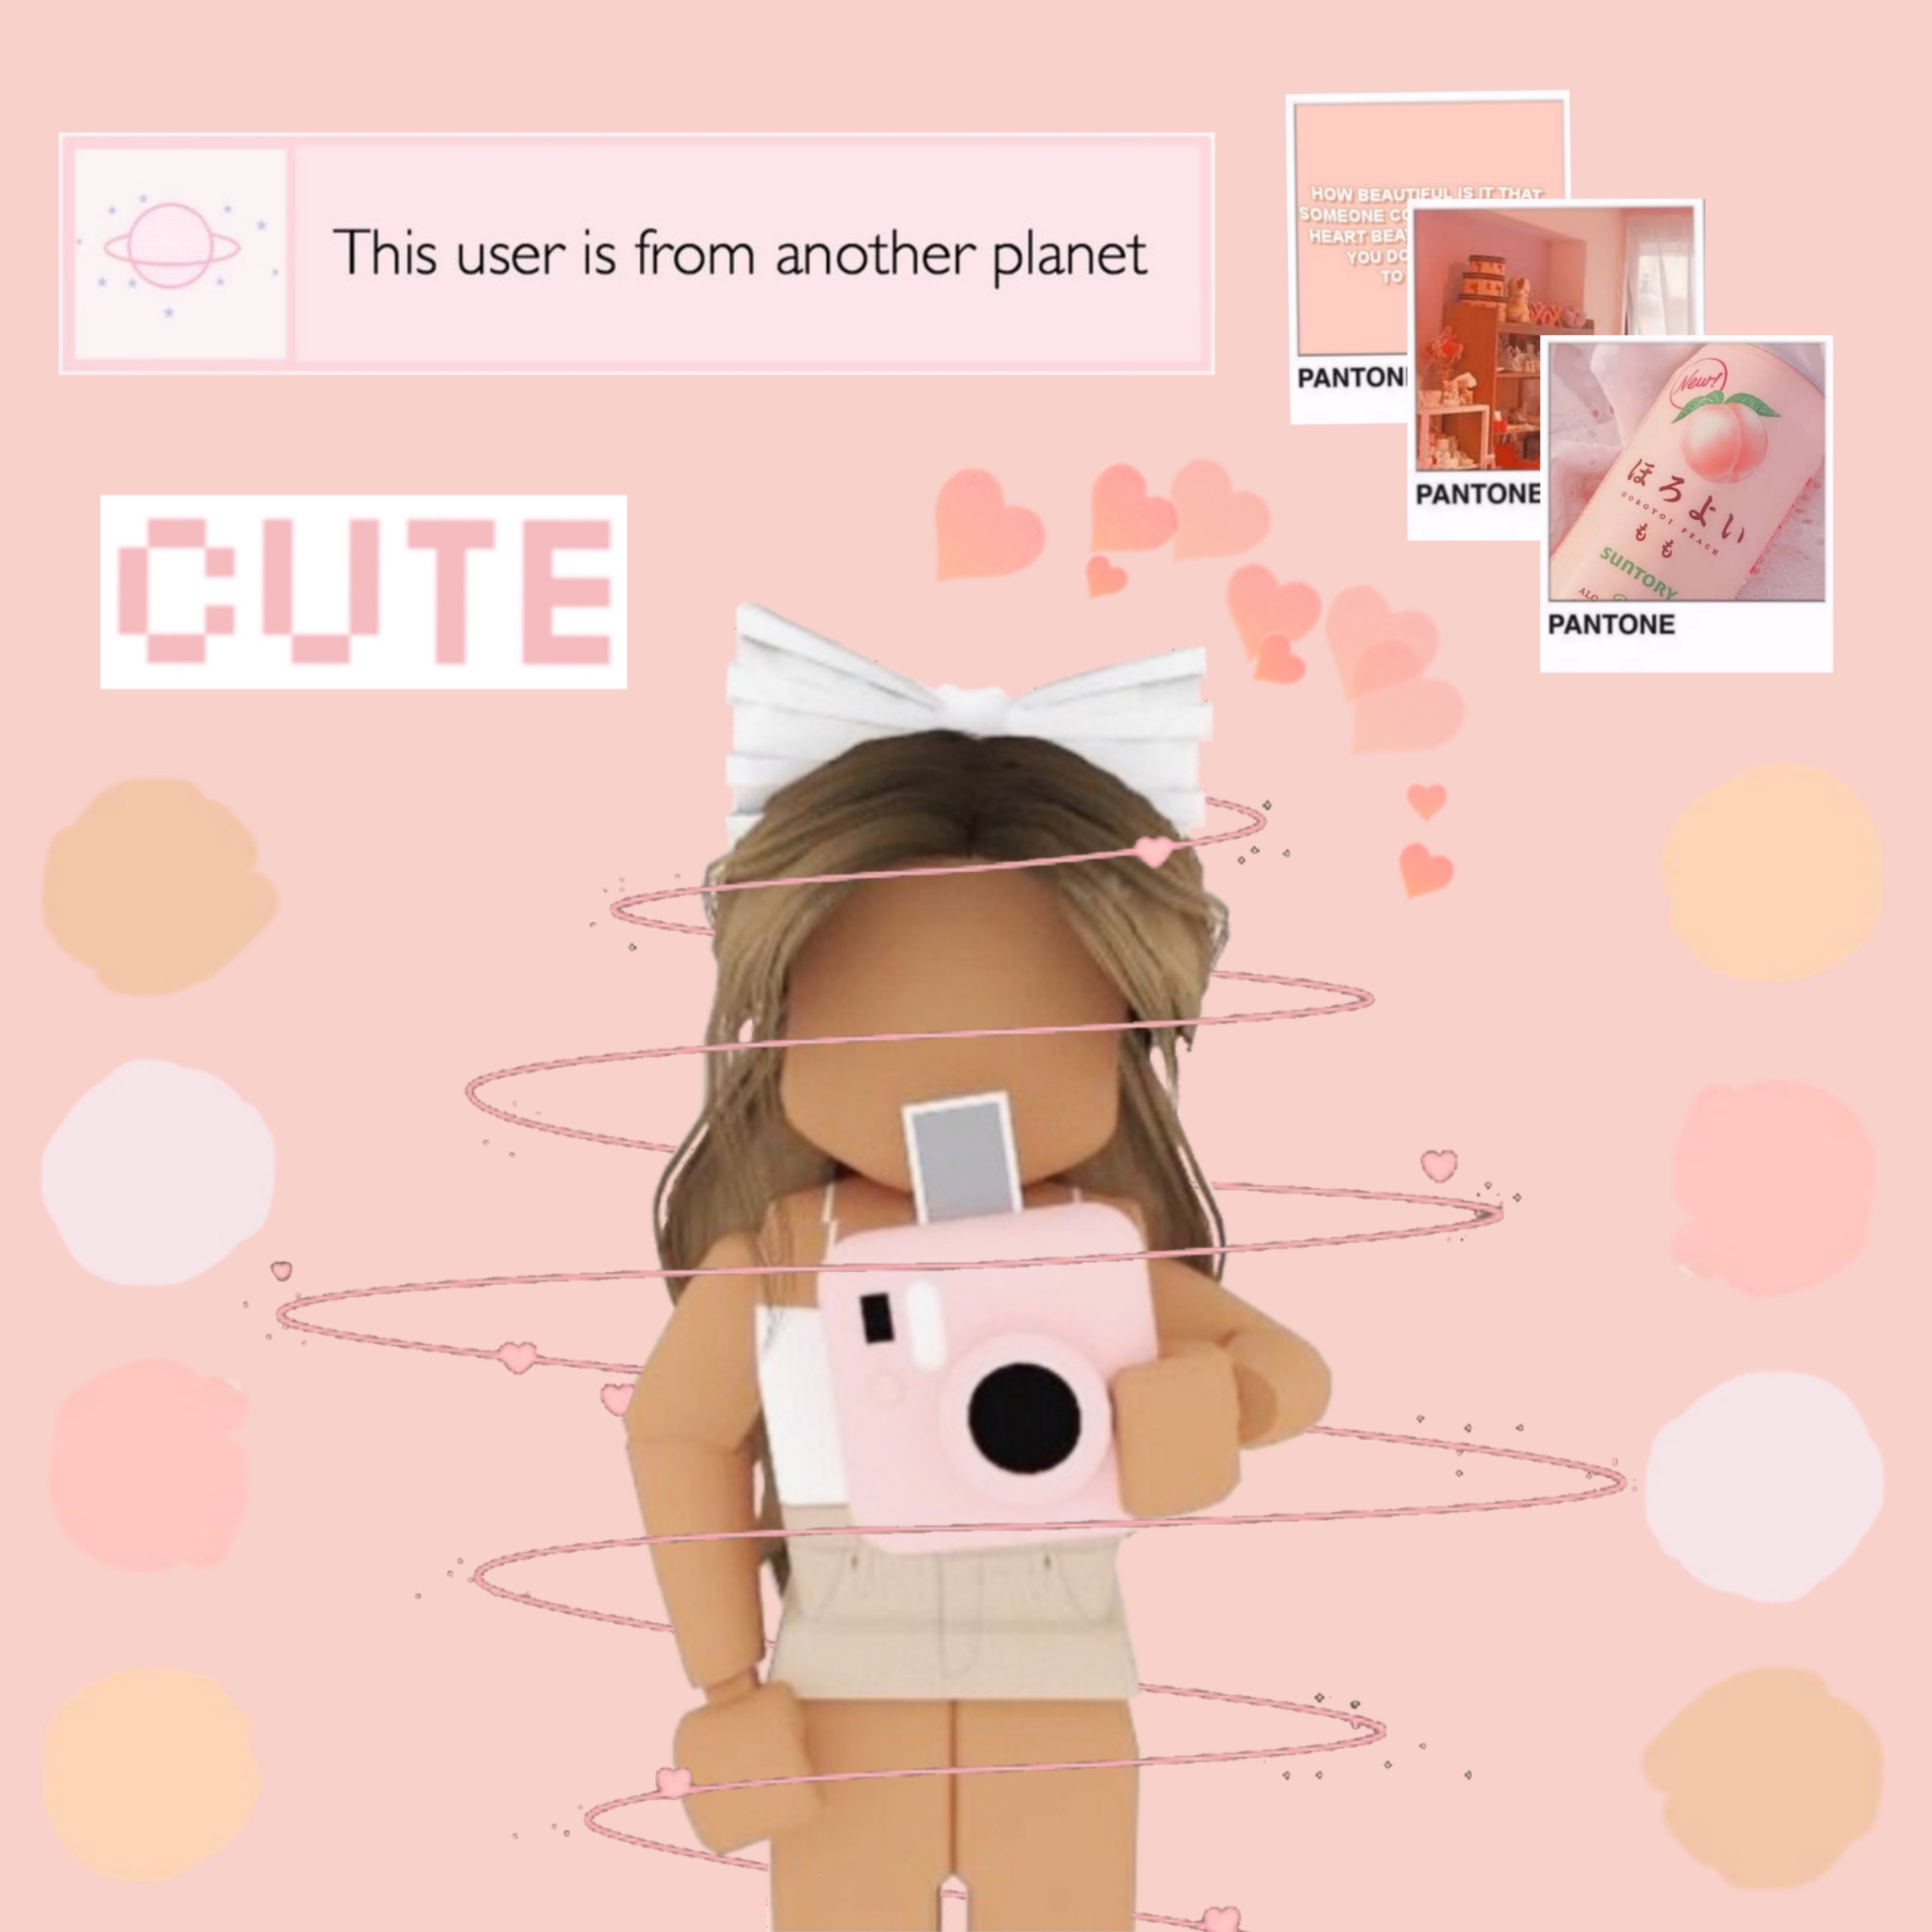 Roblox Cute Pink Girly Image By 𝕃𝕠𝕧𝕝𝕖𝕪 - roblox pictures girl pink